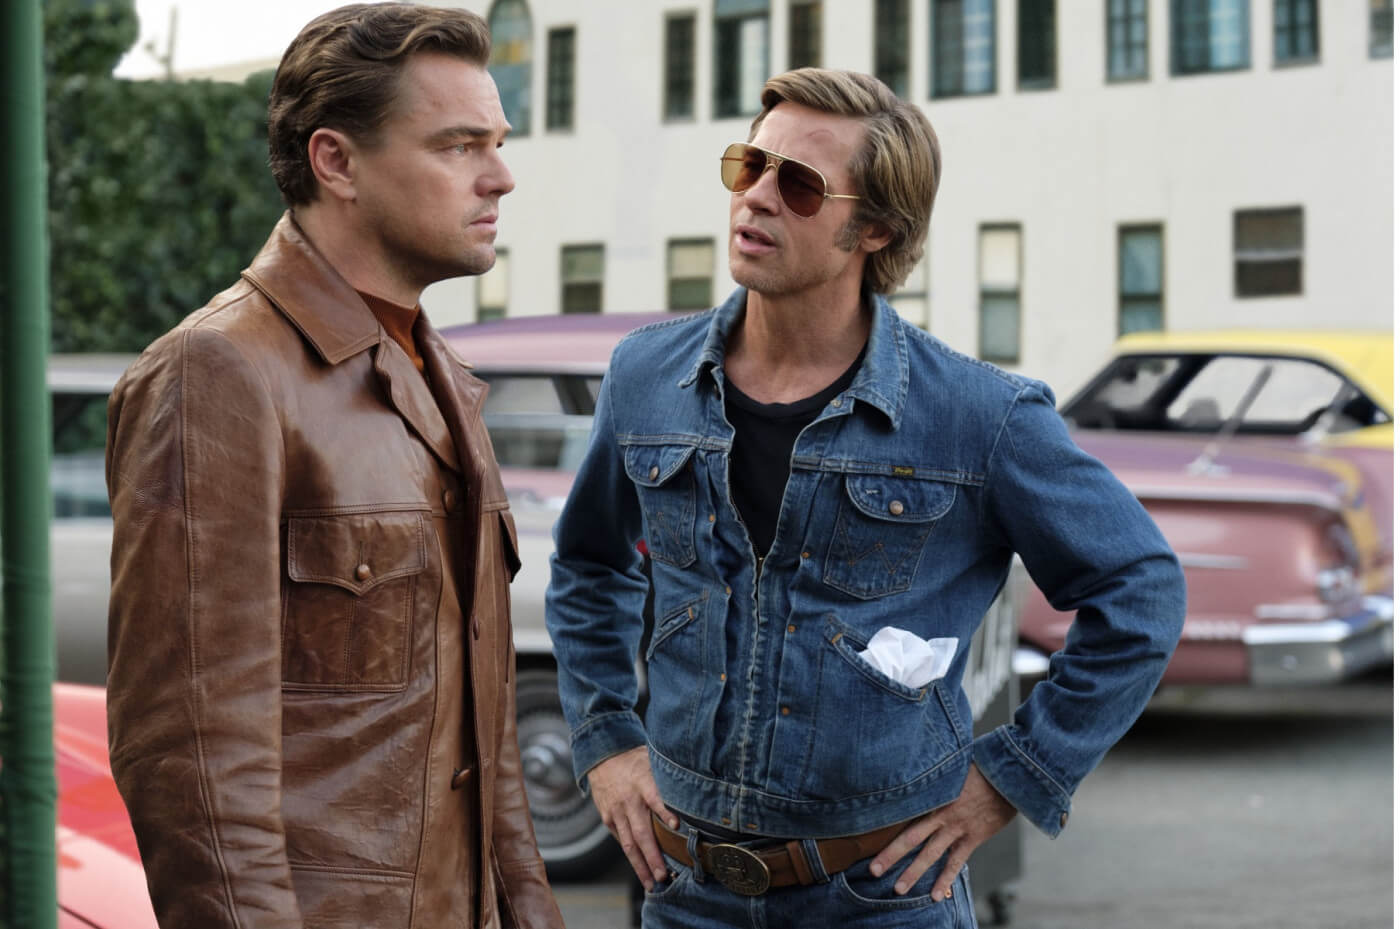 Handy Man 20220112 Once Upon A Time in Hollywood